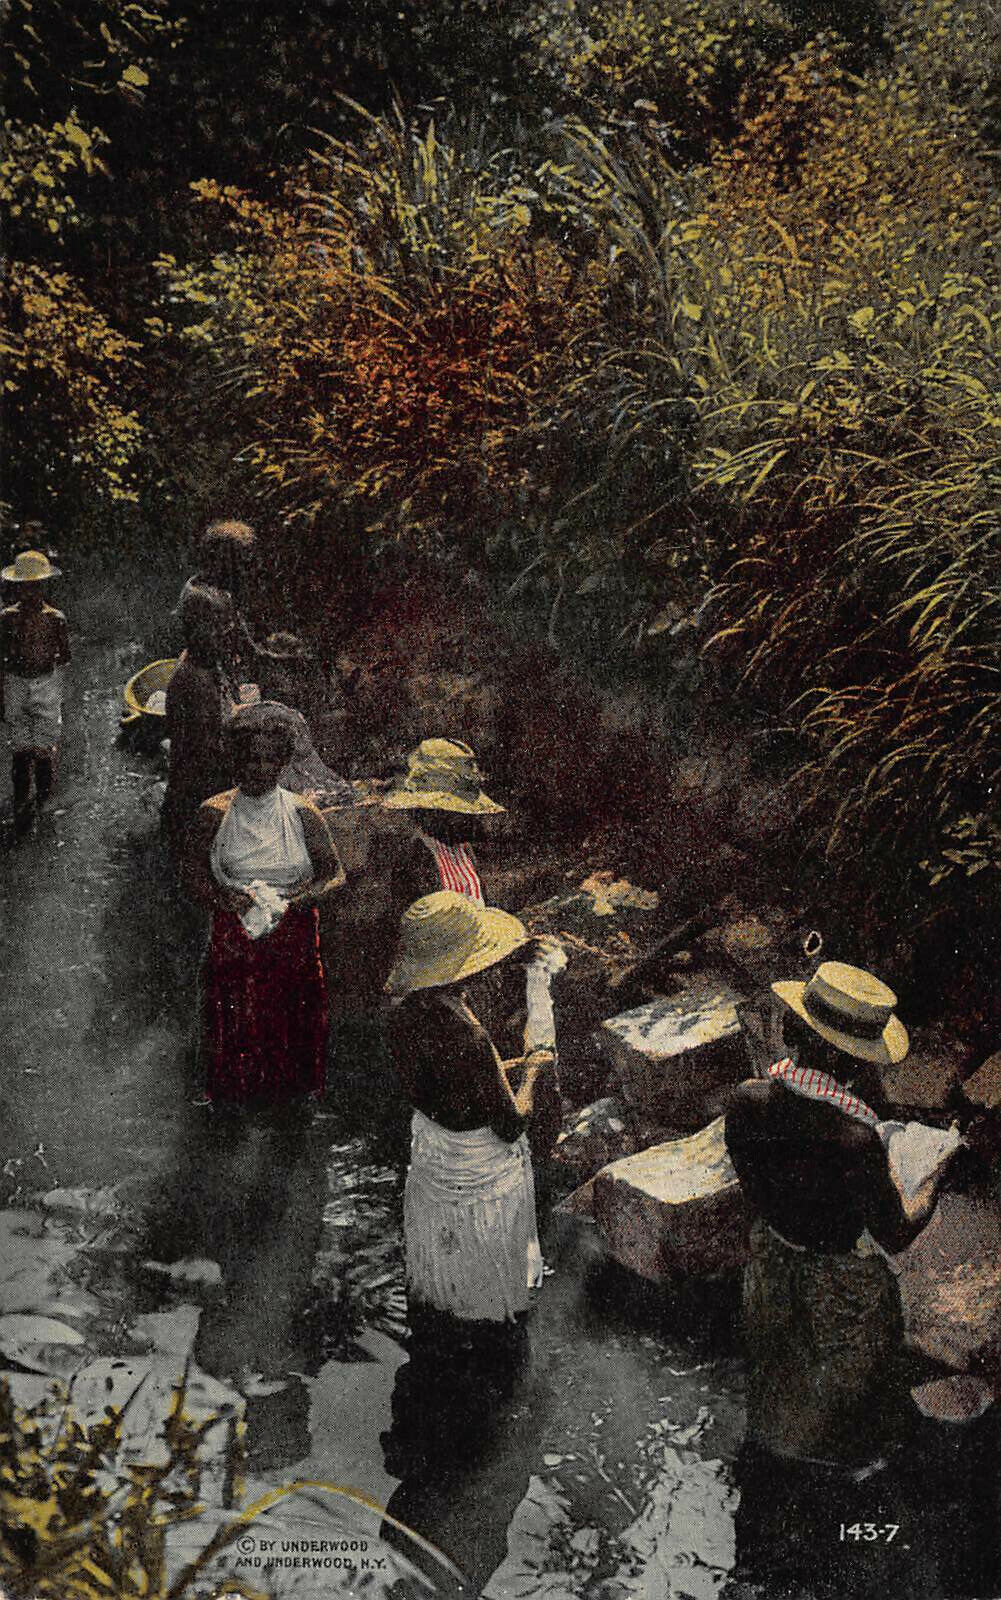 Native Indian Women Washing Clothes, Panama, Early Postcard, Unused 